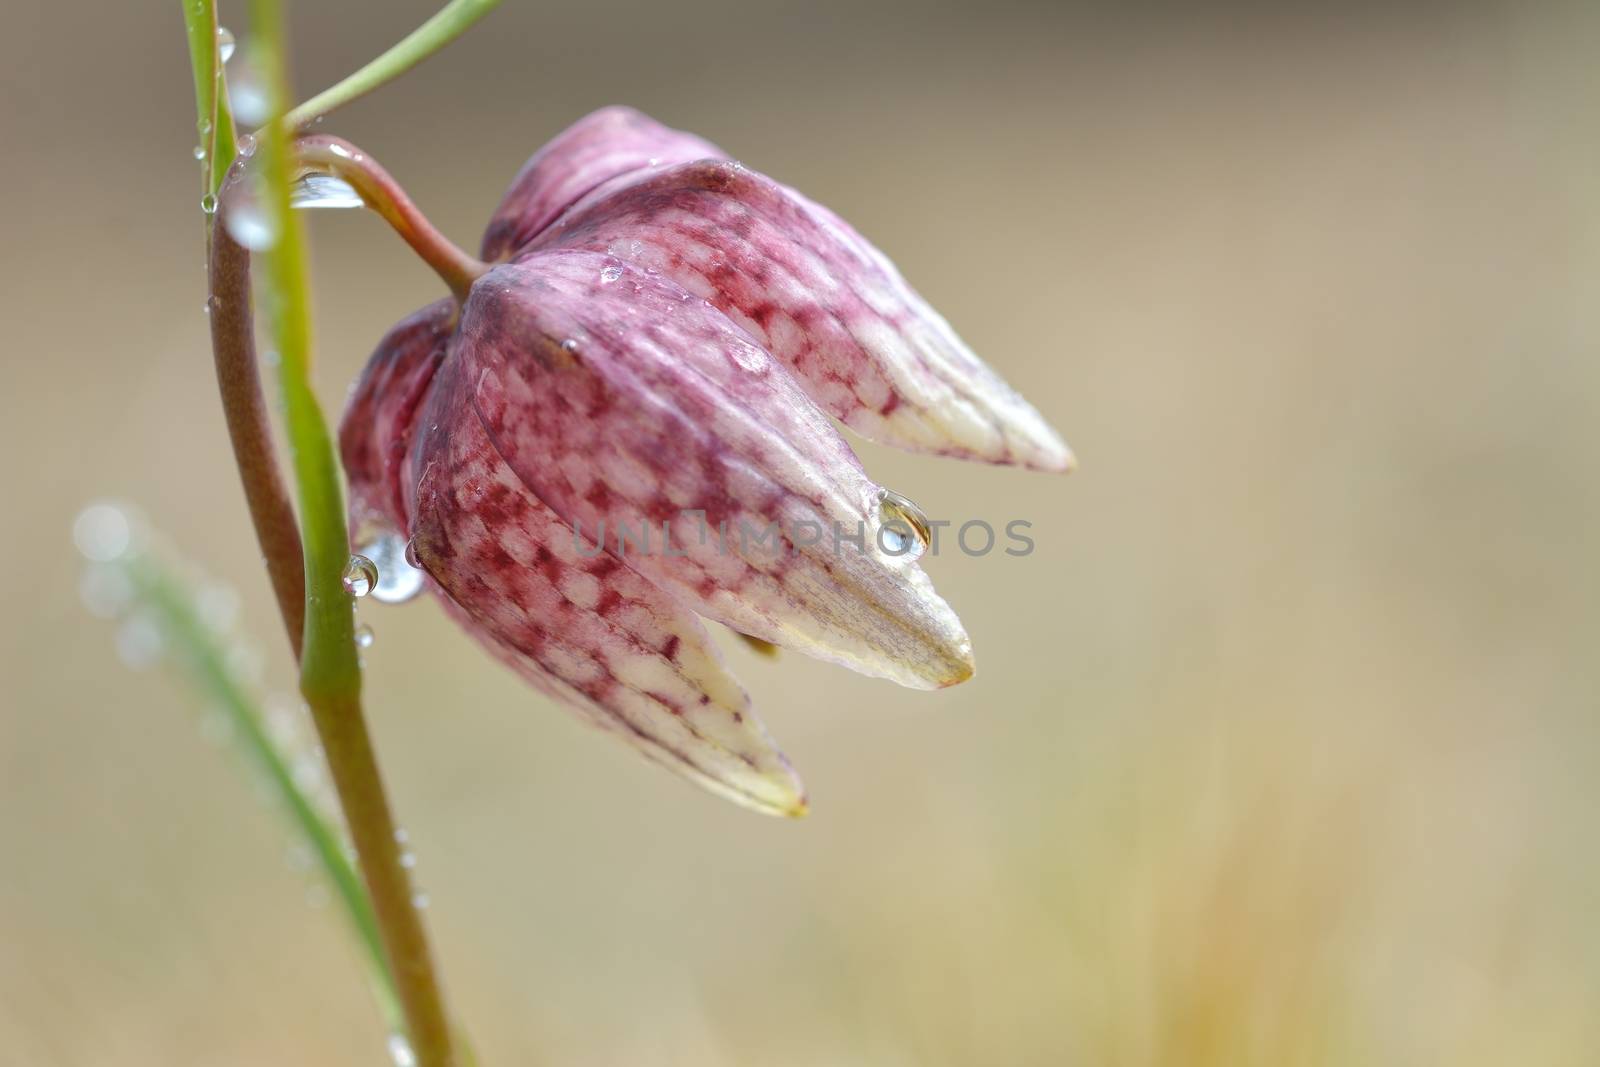 Checkered lily, Fritillaria meleagris close up by comet